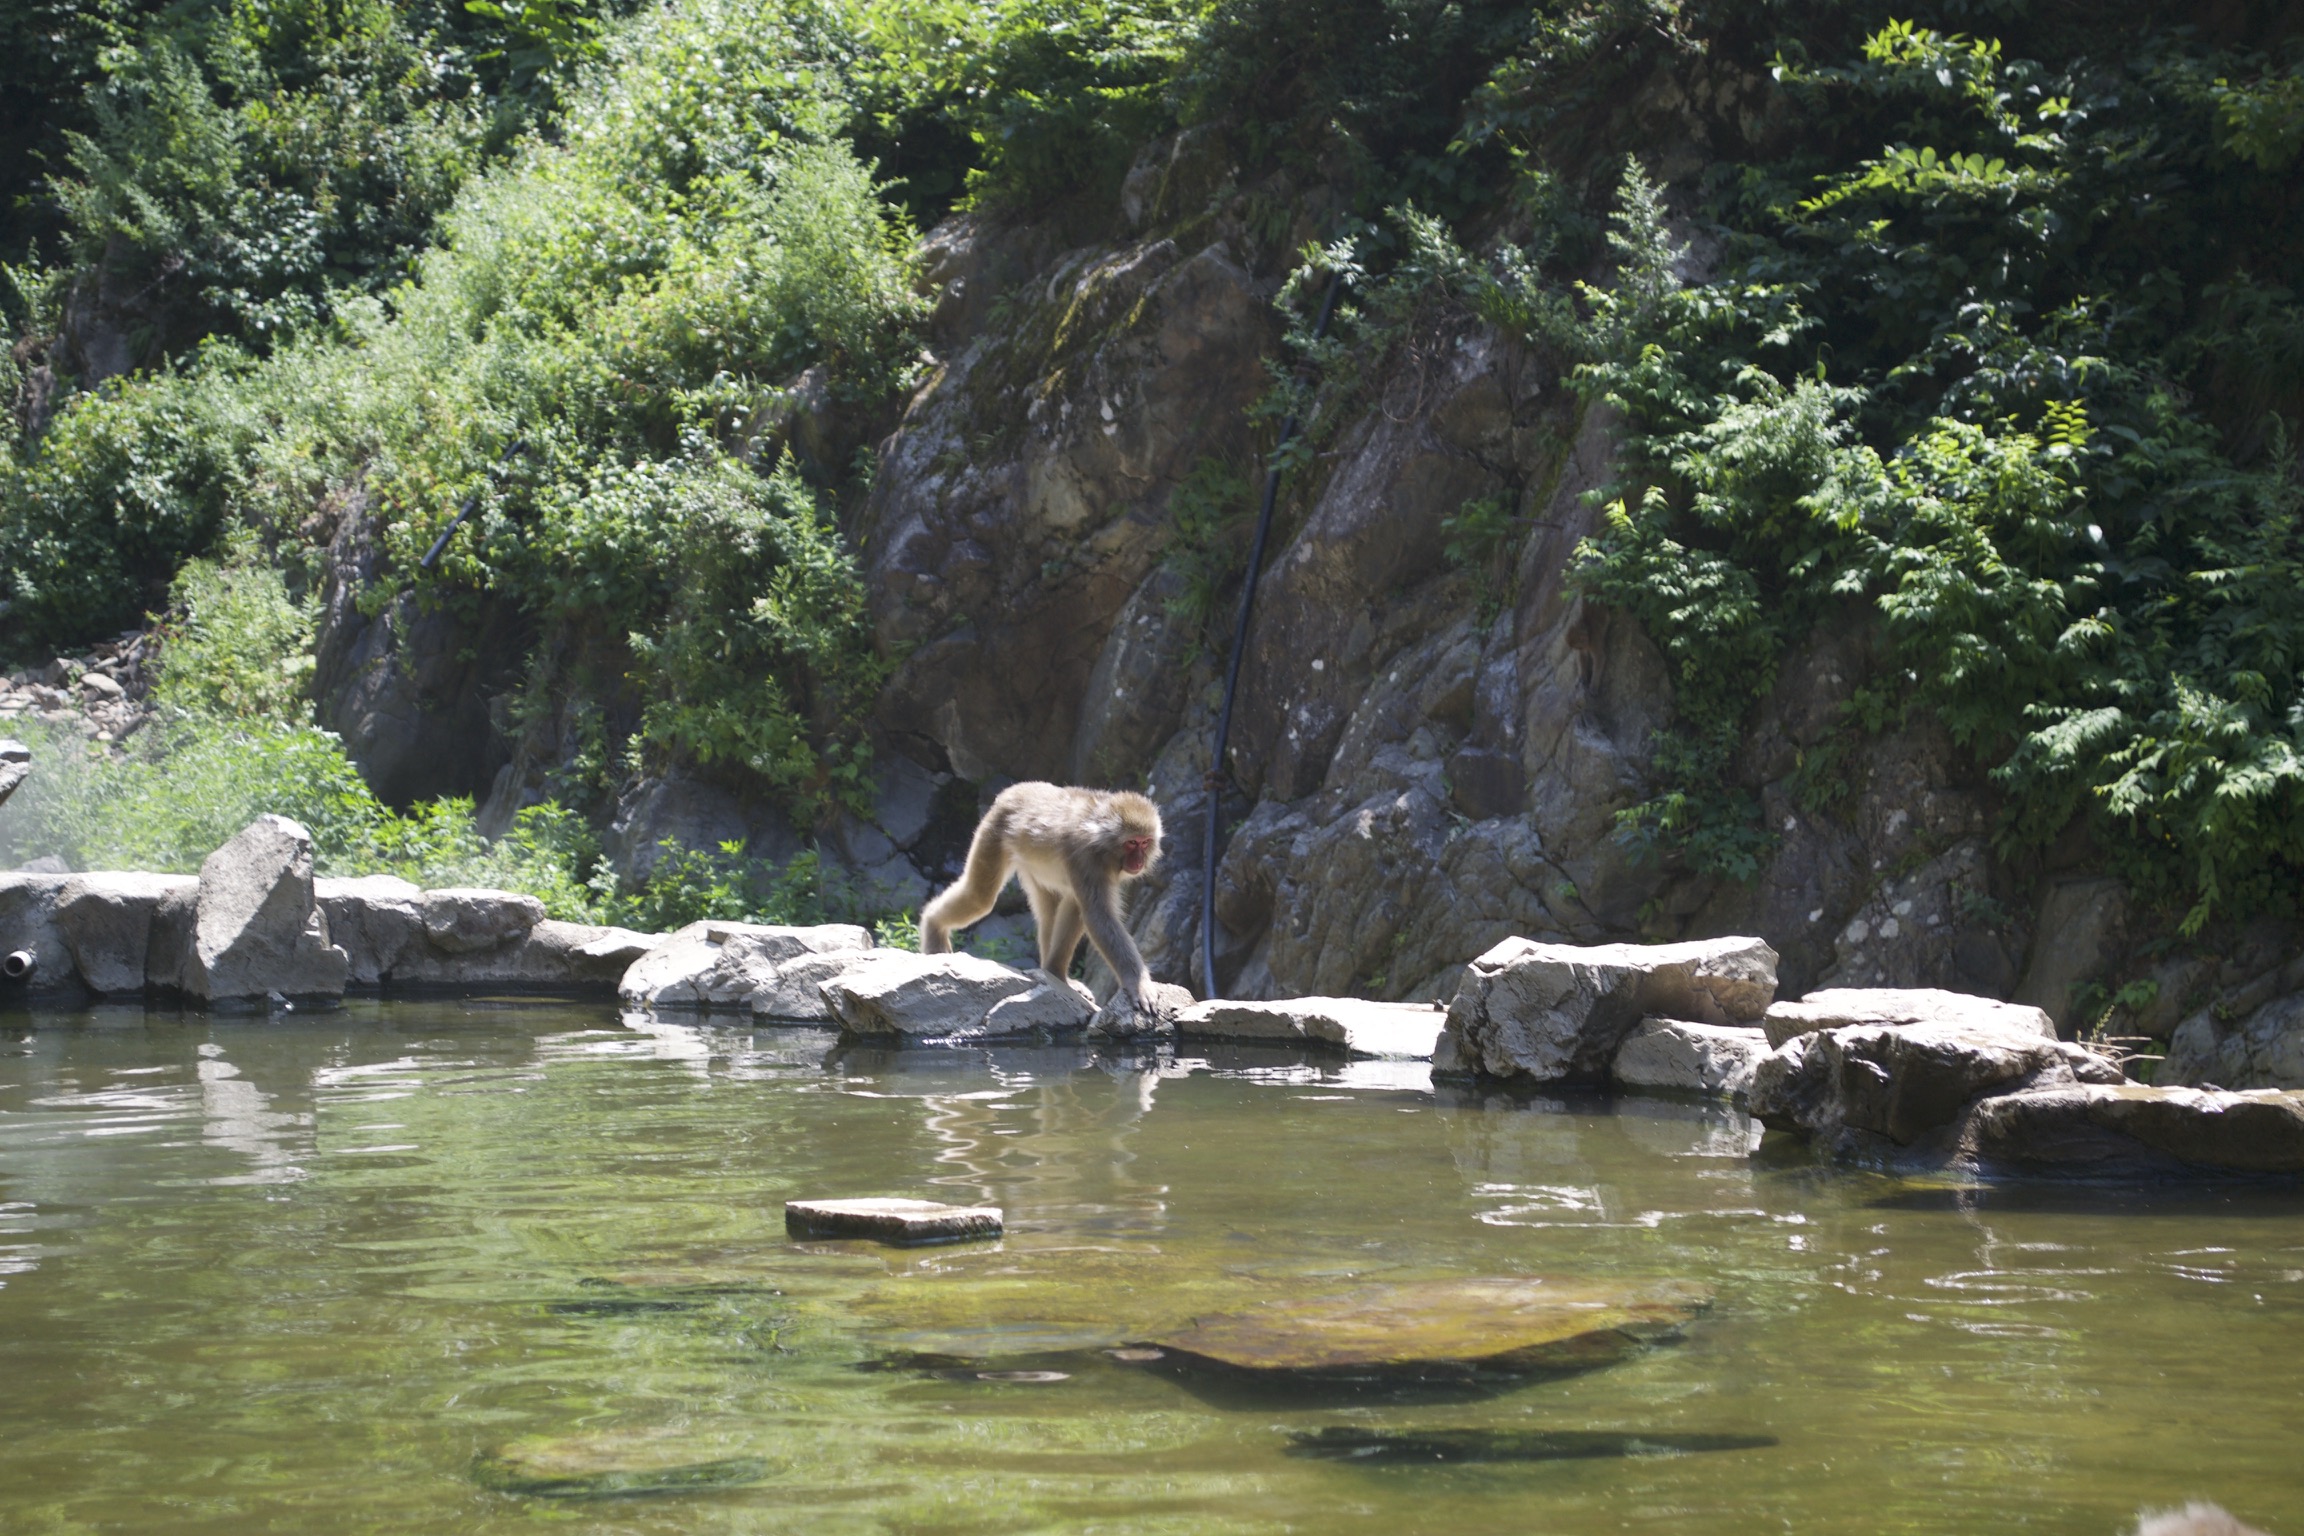 A snow monkey walks along the side of the onsen.